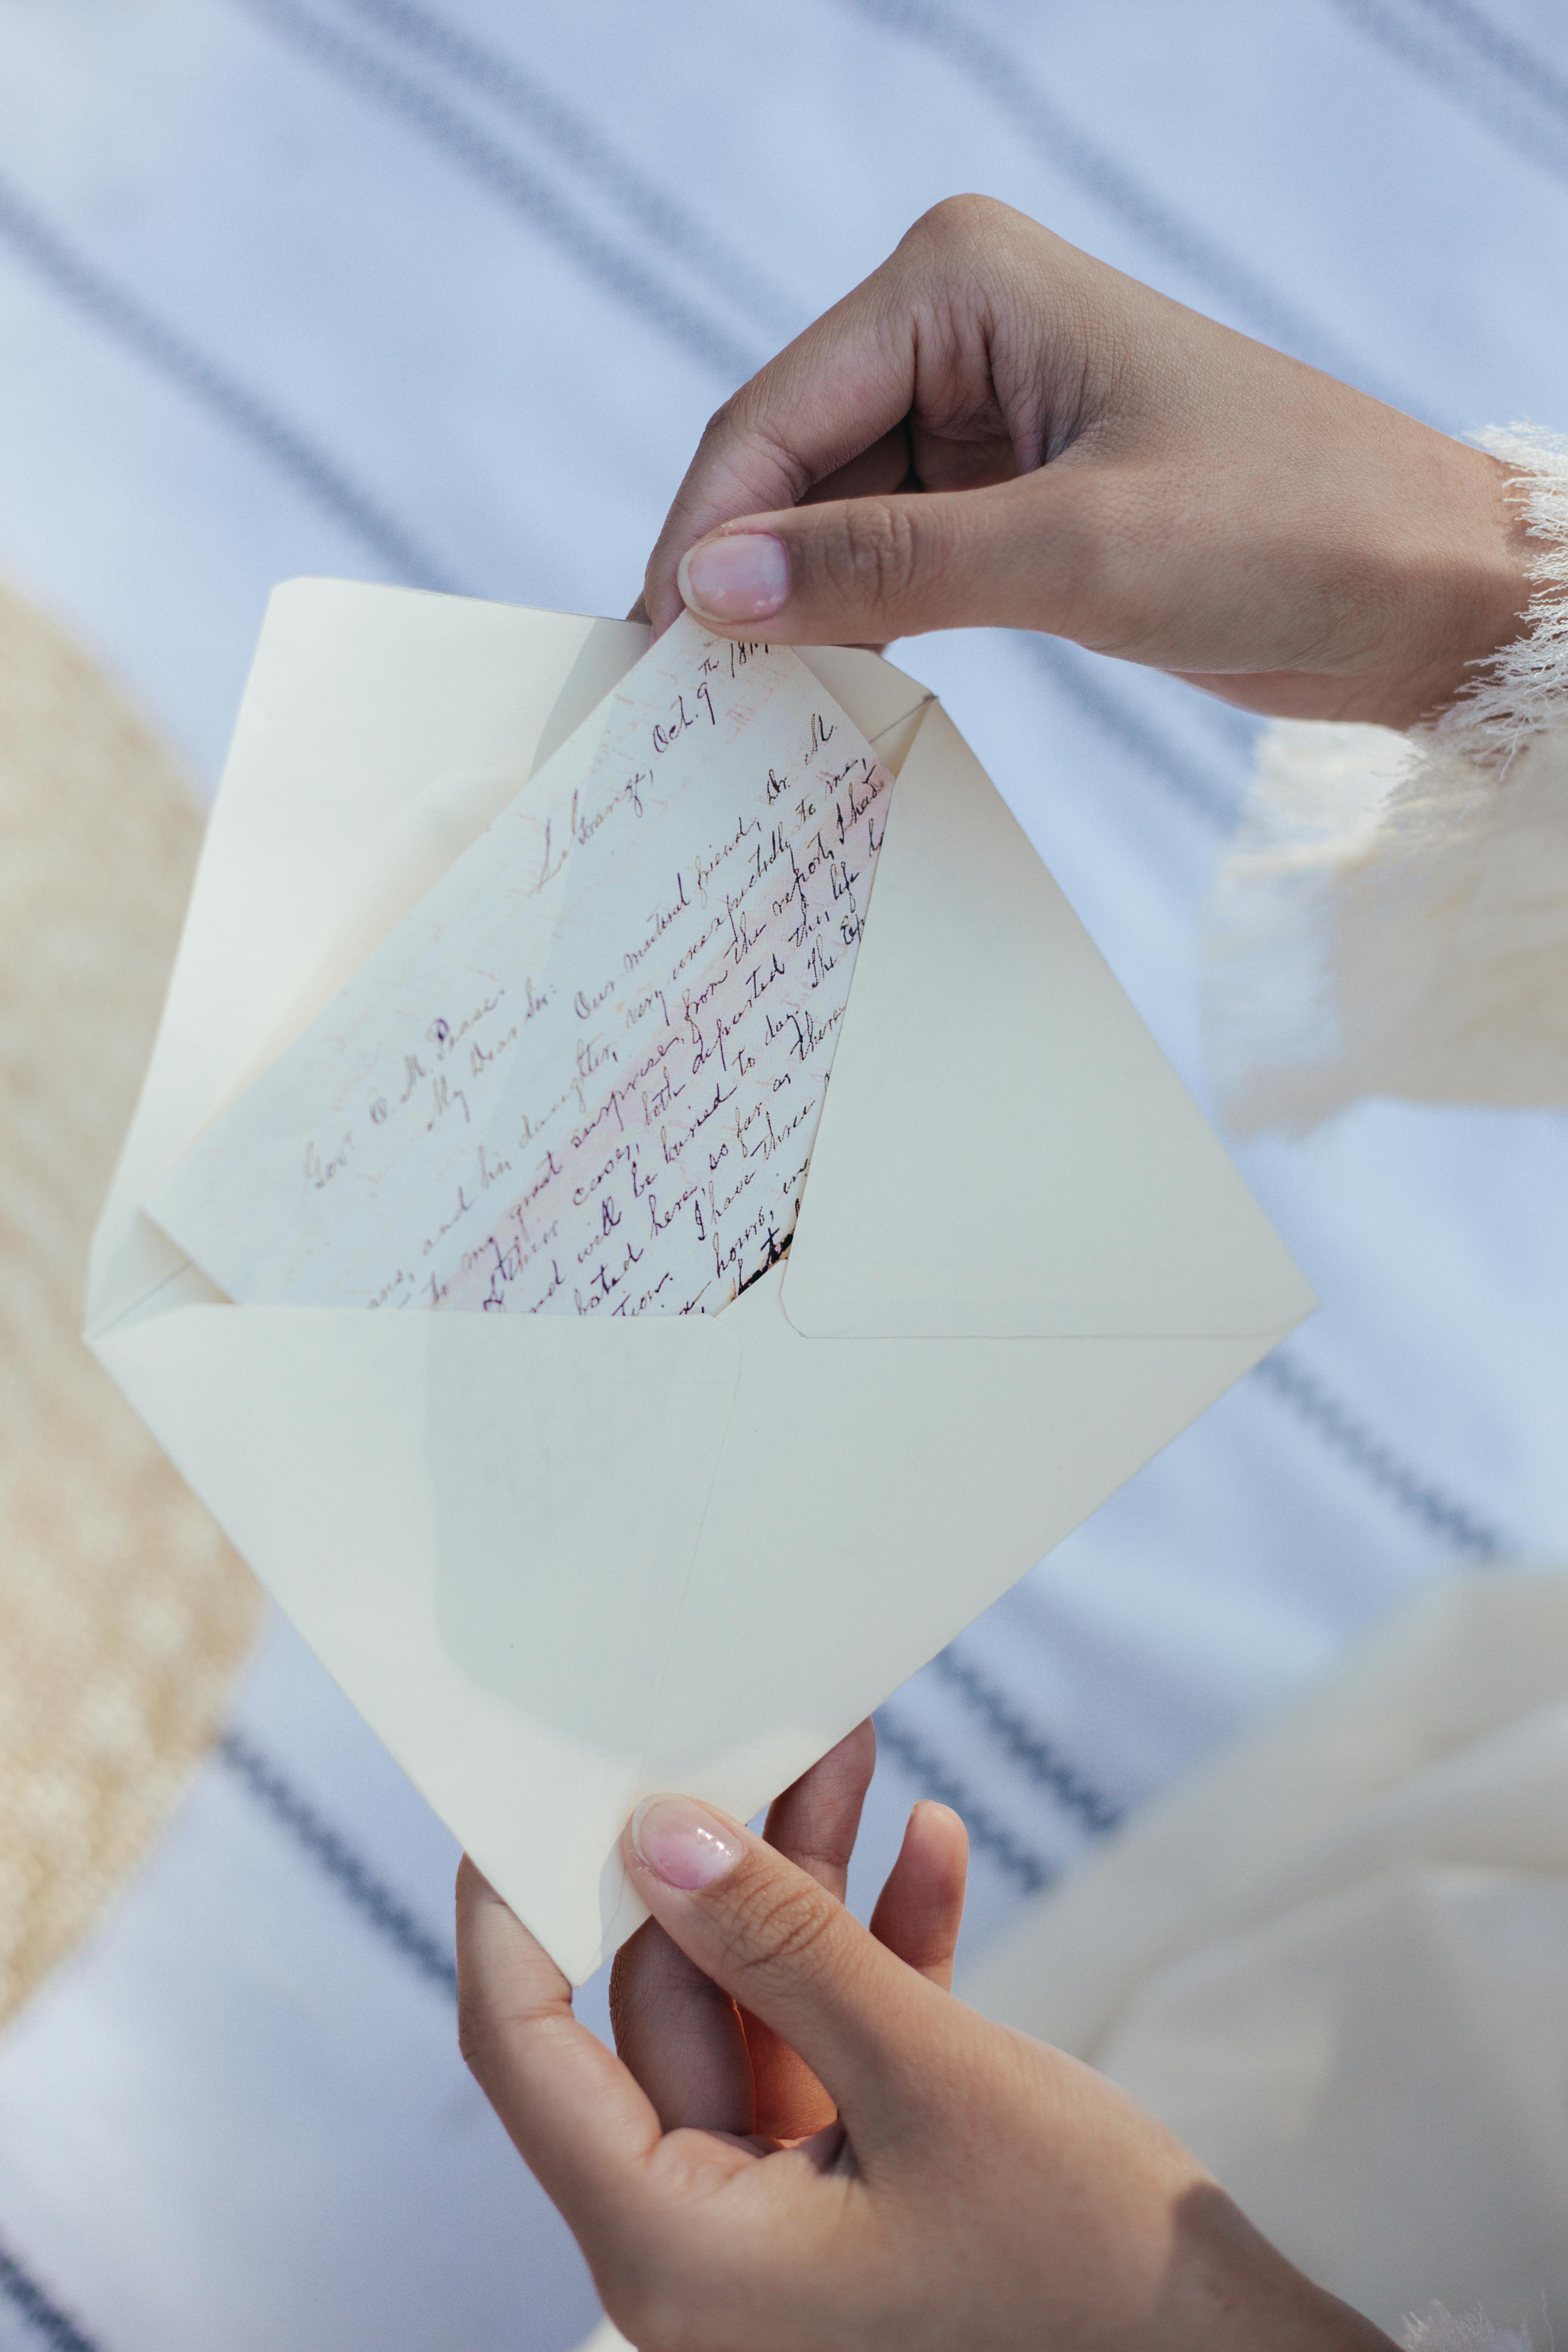 A woman hand holding an envelope with a handwritten letter inside | Source: Pexels